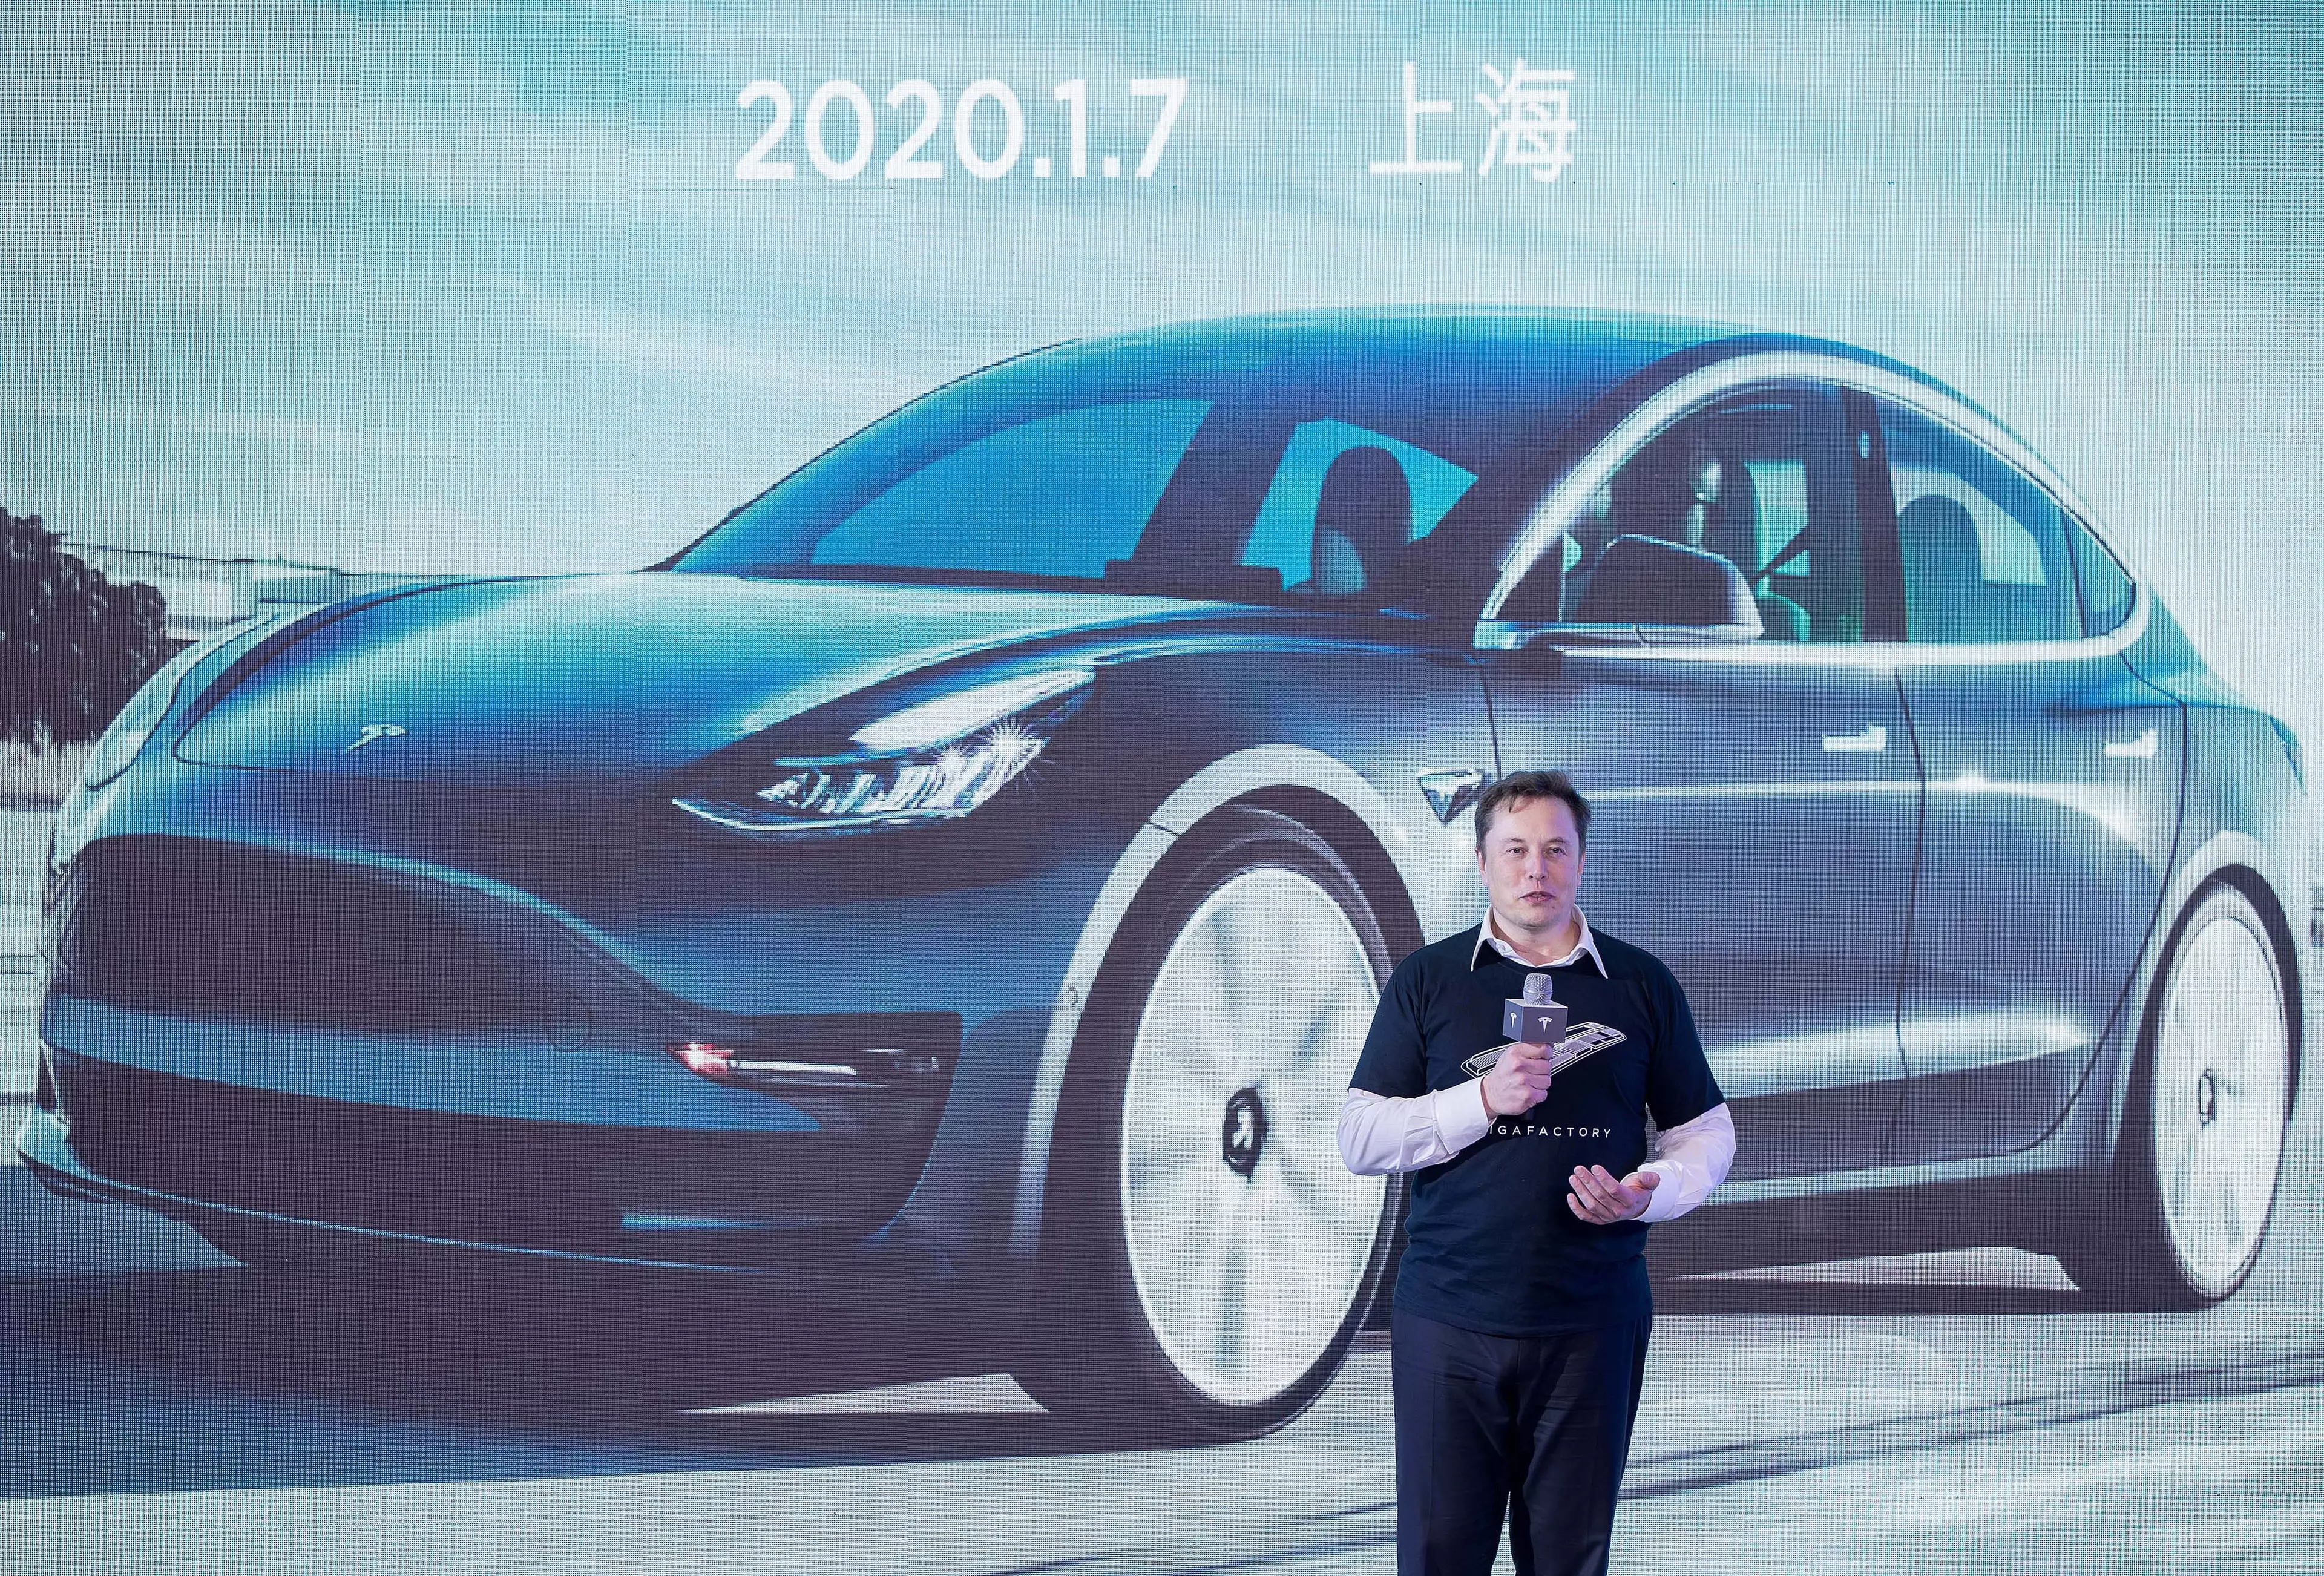 Musk wowed the audience at the Shanghai convention.